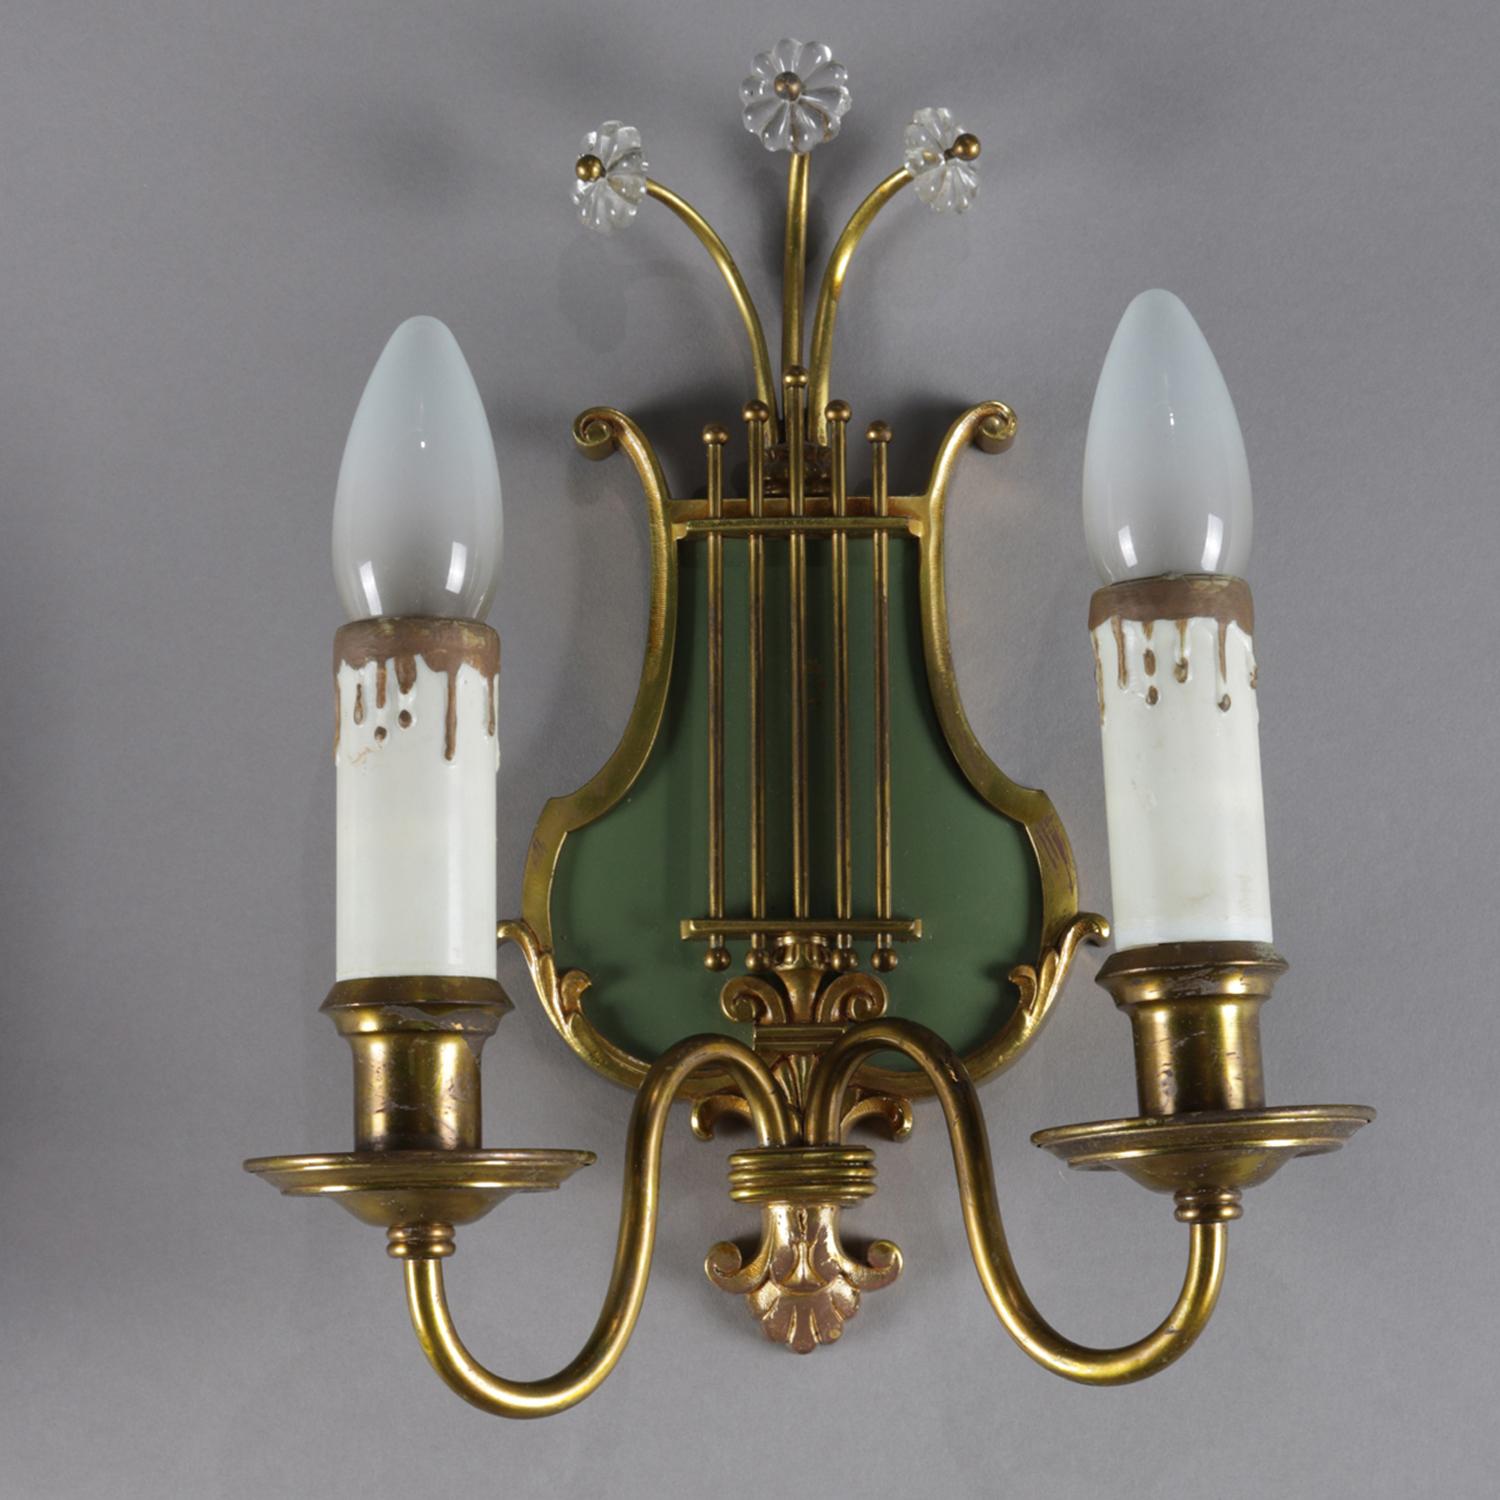 Pair of vintage wall sconces feature foliate decorated lyre form with crest having crystal flower form highlights and surmounting two candle lights on S-scroll arms with lower central fleur de lis finial, 20th century

Measures: 11.5